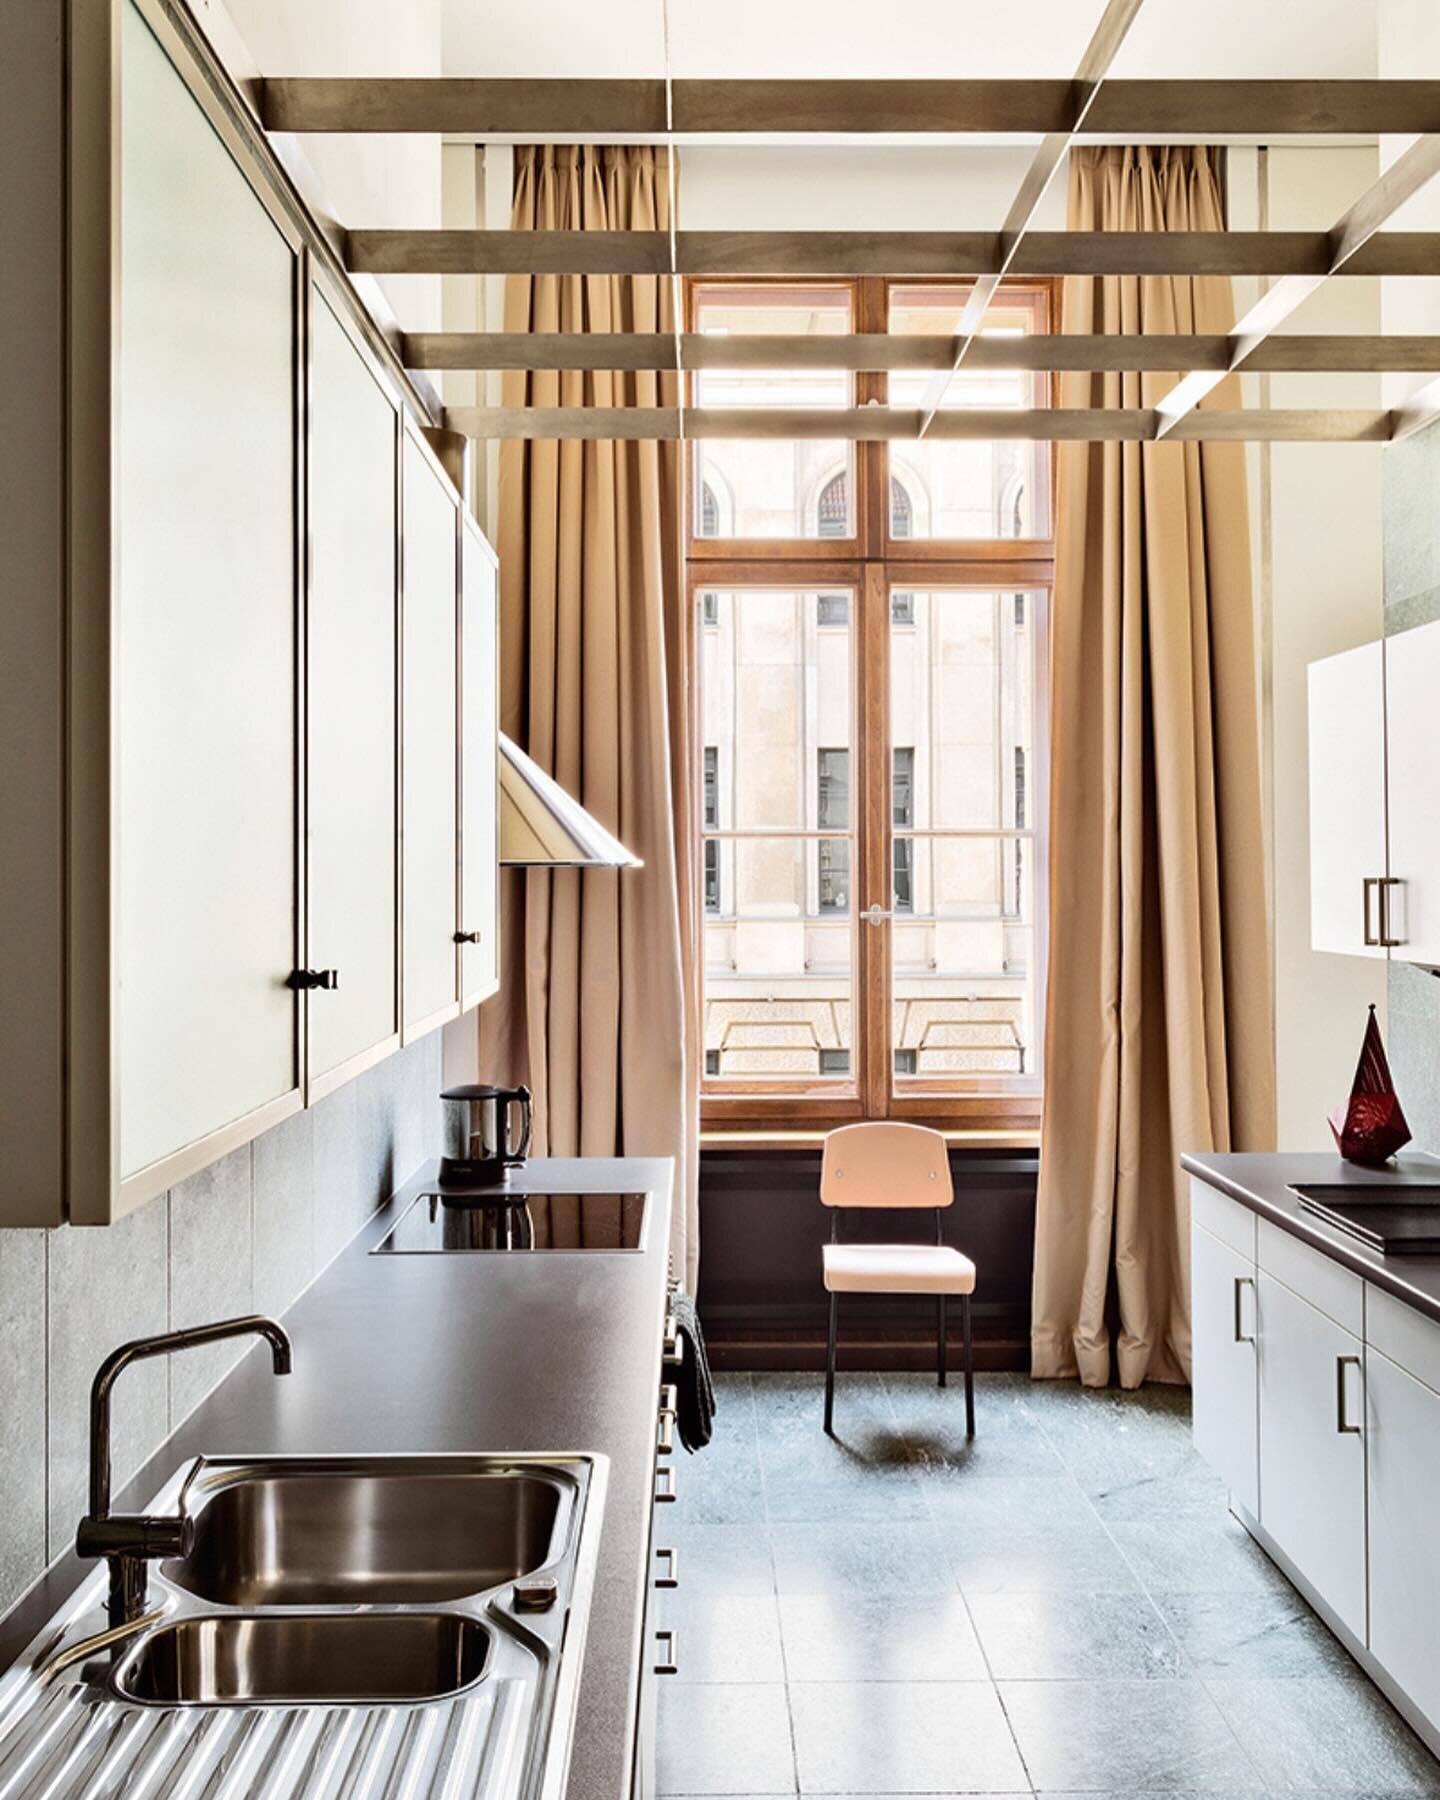 Industrial, elevated.

I&rsquo;ve always loved this kitchen, specifically for the way it marries a starkly industrial style cabinetry with elegant drapery (and that brilliant modernist dropped ceiling detail). However, I only recently realized how th